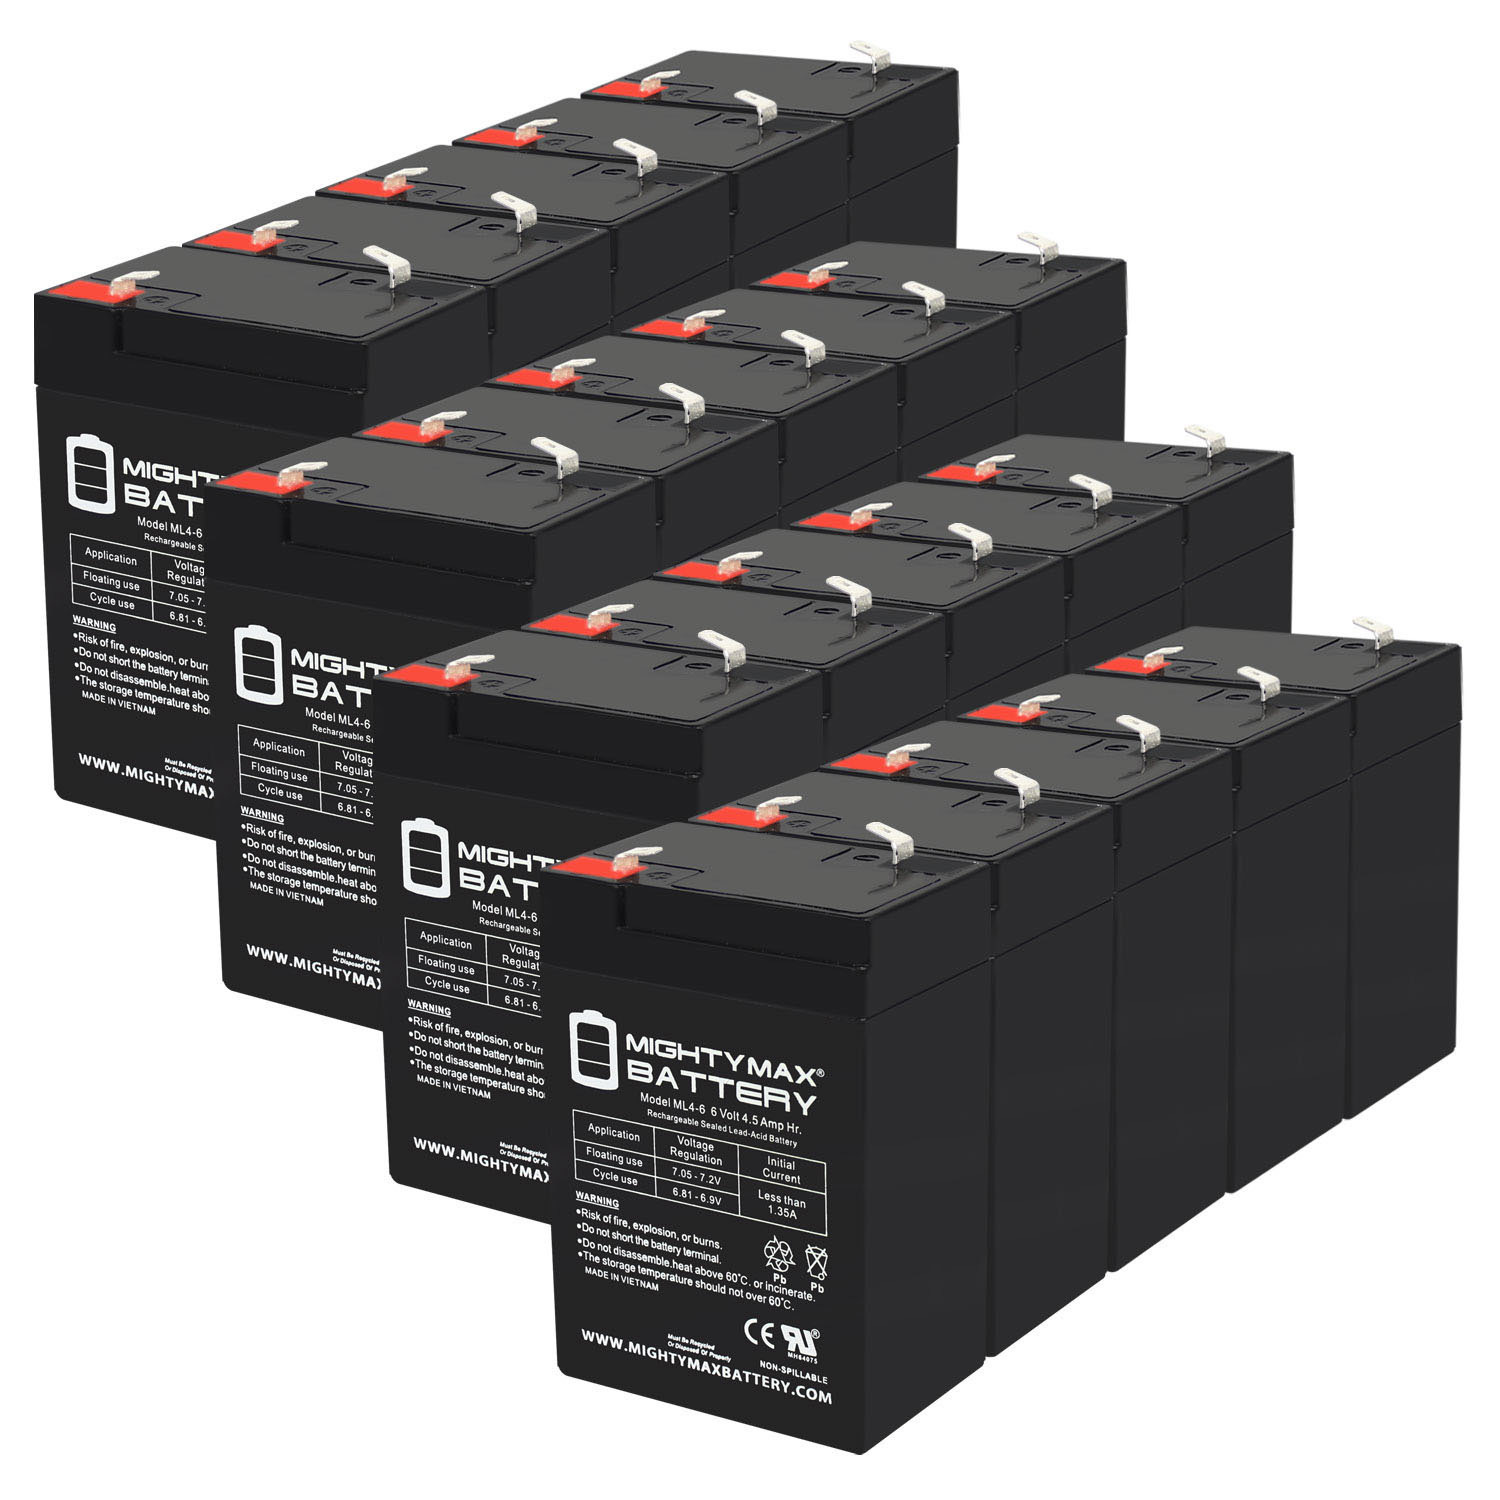 6V 4.5AH SLA Replacement Battery for Abbott Lab Life Care Pump 4D - 20 Pack